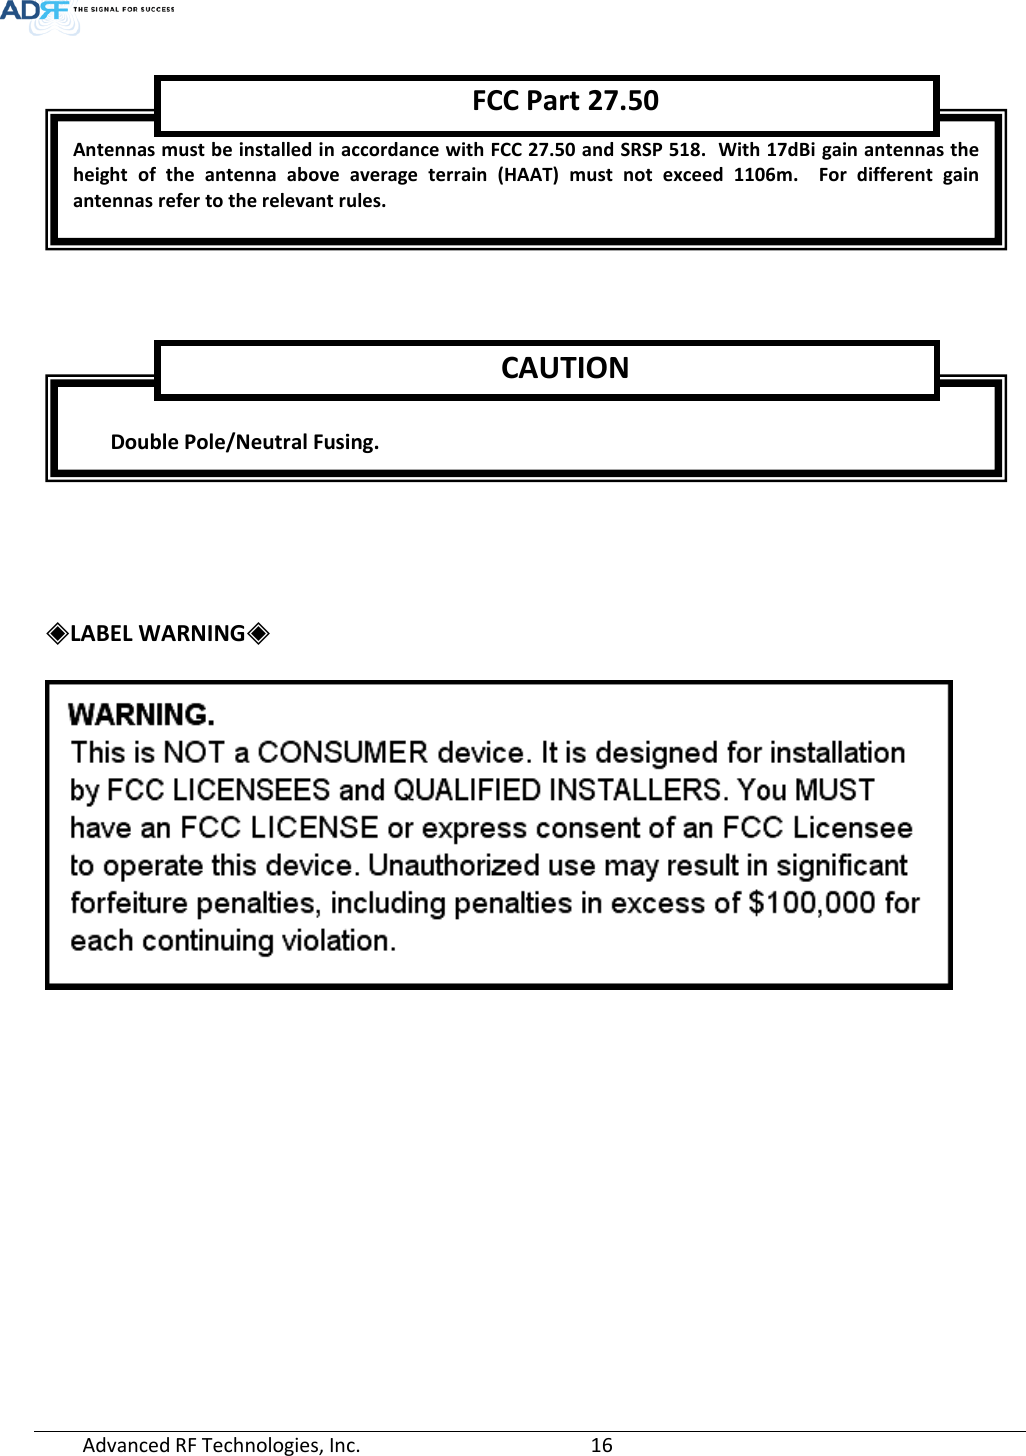  Advanced RF Technologies, Inc.       16        ◈LABEL WARNING◈   Antennas must be installed in accordance with FCC 27.50 and SRSP 518.  With 17dBi gain antennas the height of the antenna above average terrain (HAAT) must not exceed 1106m.  For different gain antennas refer to the relevant rules.  FCC Part 27.50   Double Pole/Neutral Fusing. CAUTION 